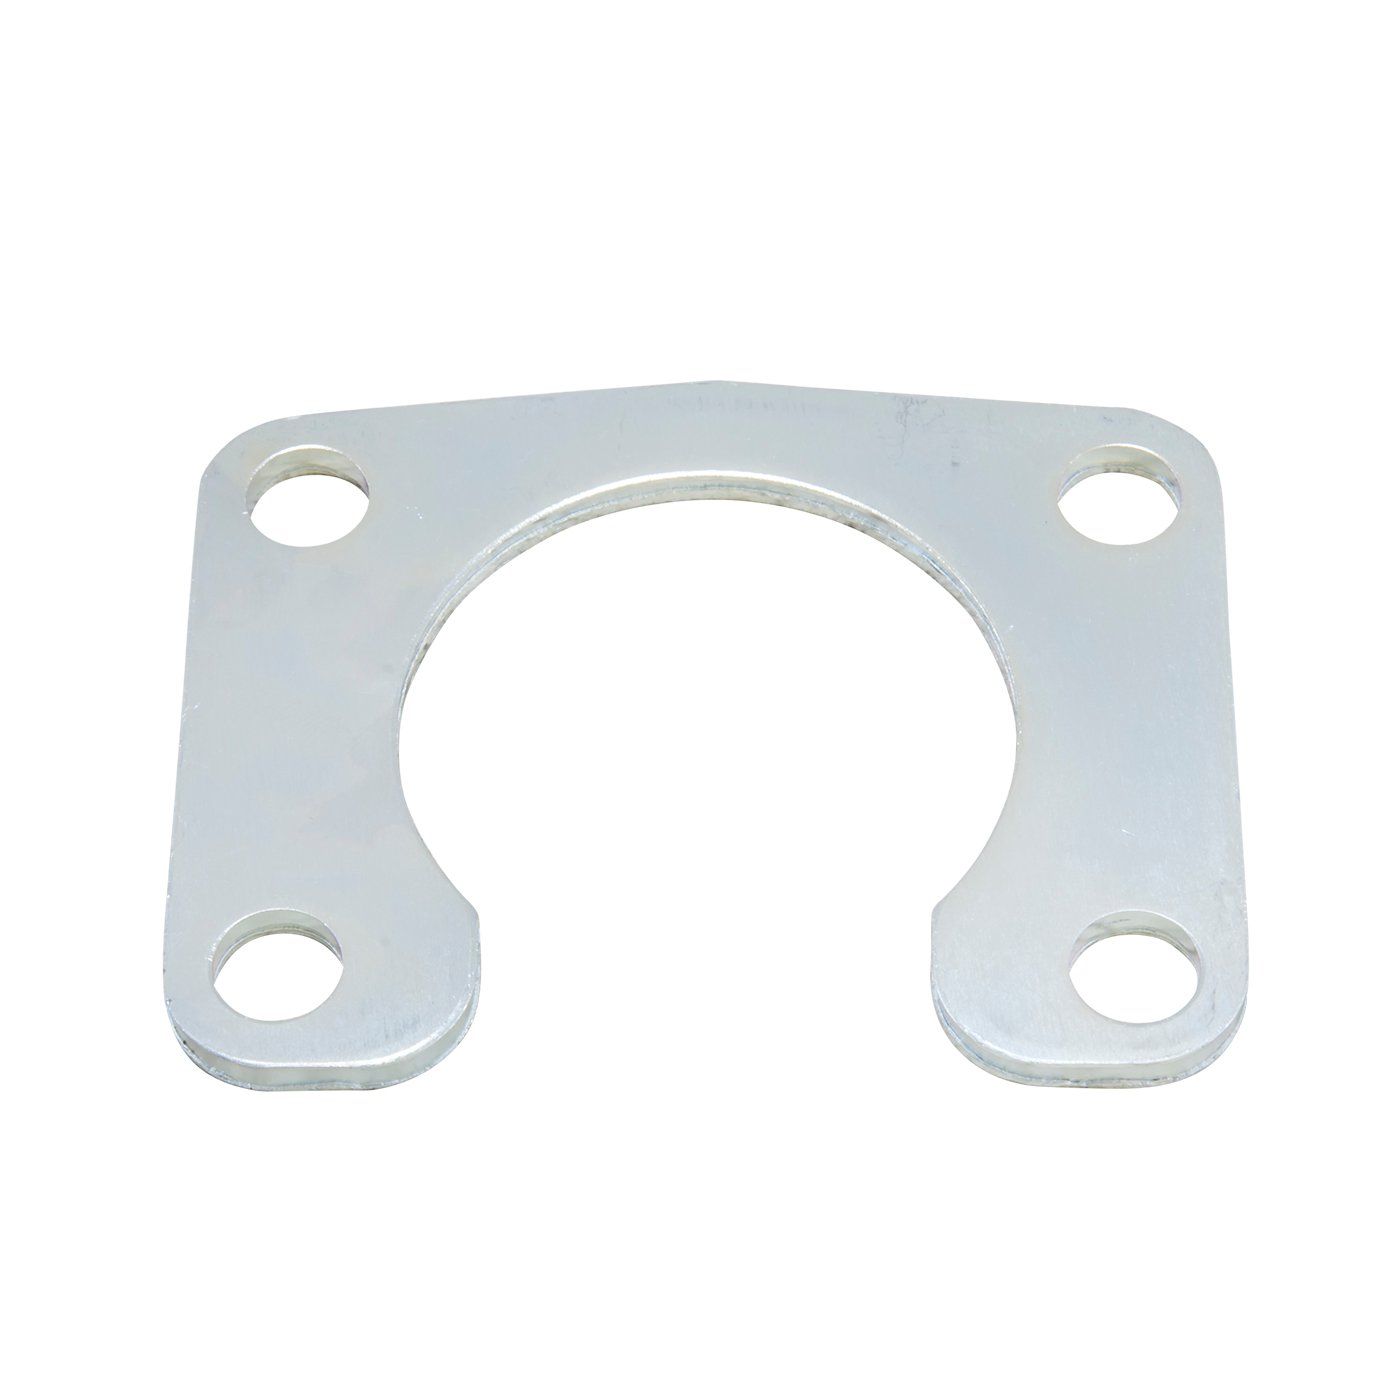 Axle Bearing Retainer For Ford 9 in., Large Bearing, 1/2 in. Bolt Holes